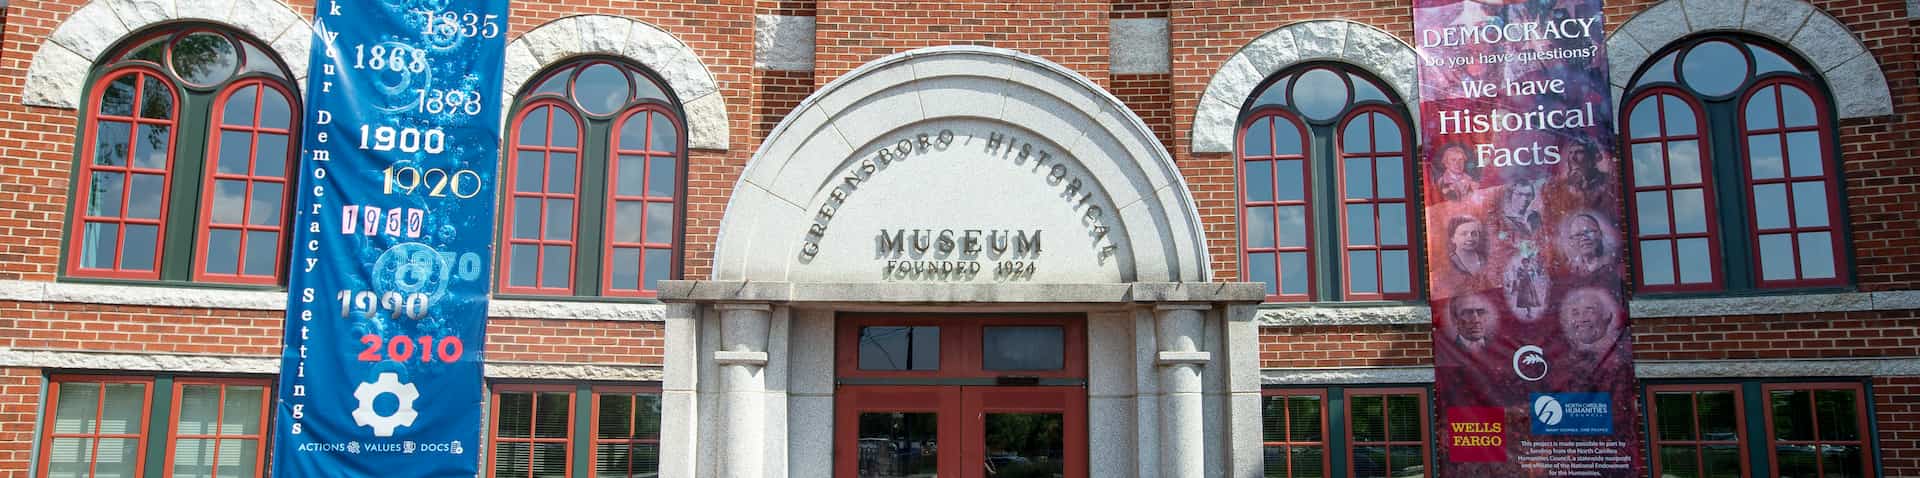 exterior of the Greensboro History Museum